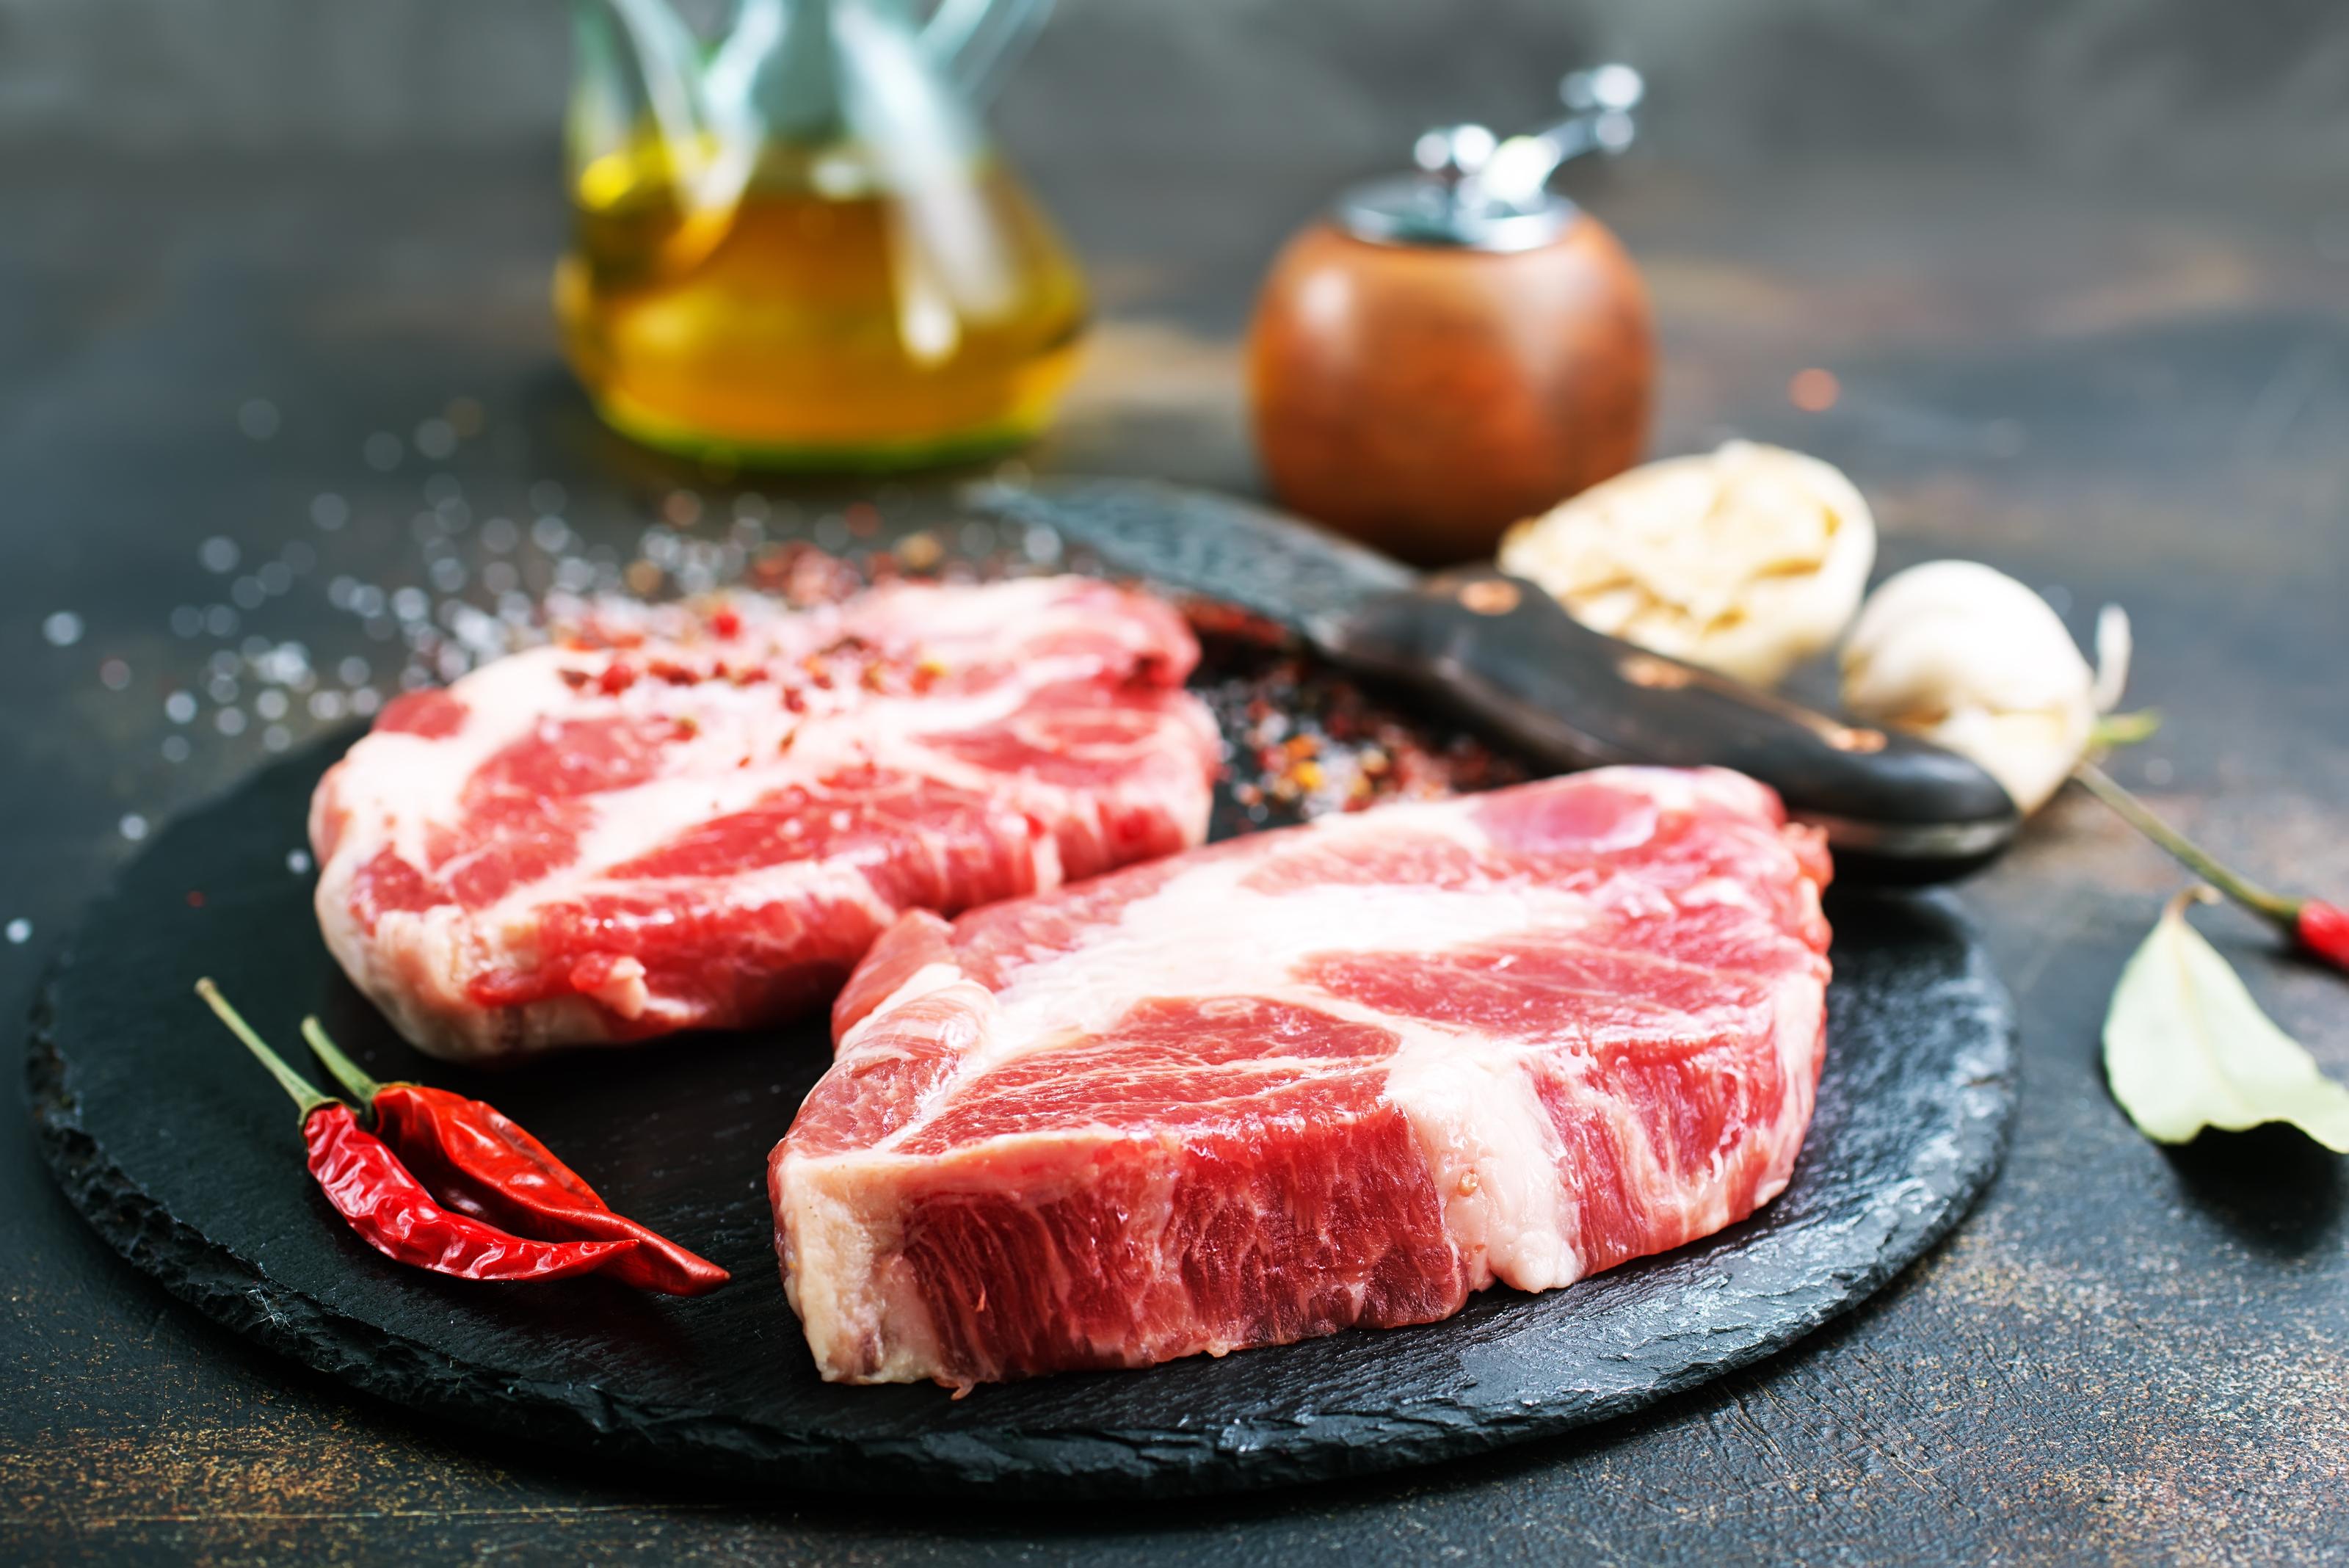 What to look for in a Wholesale Meat Supplier?